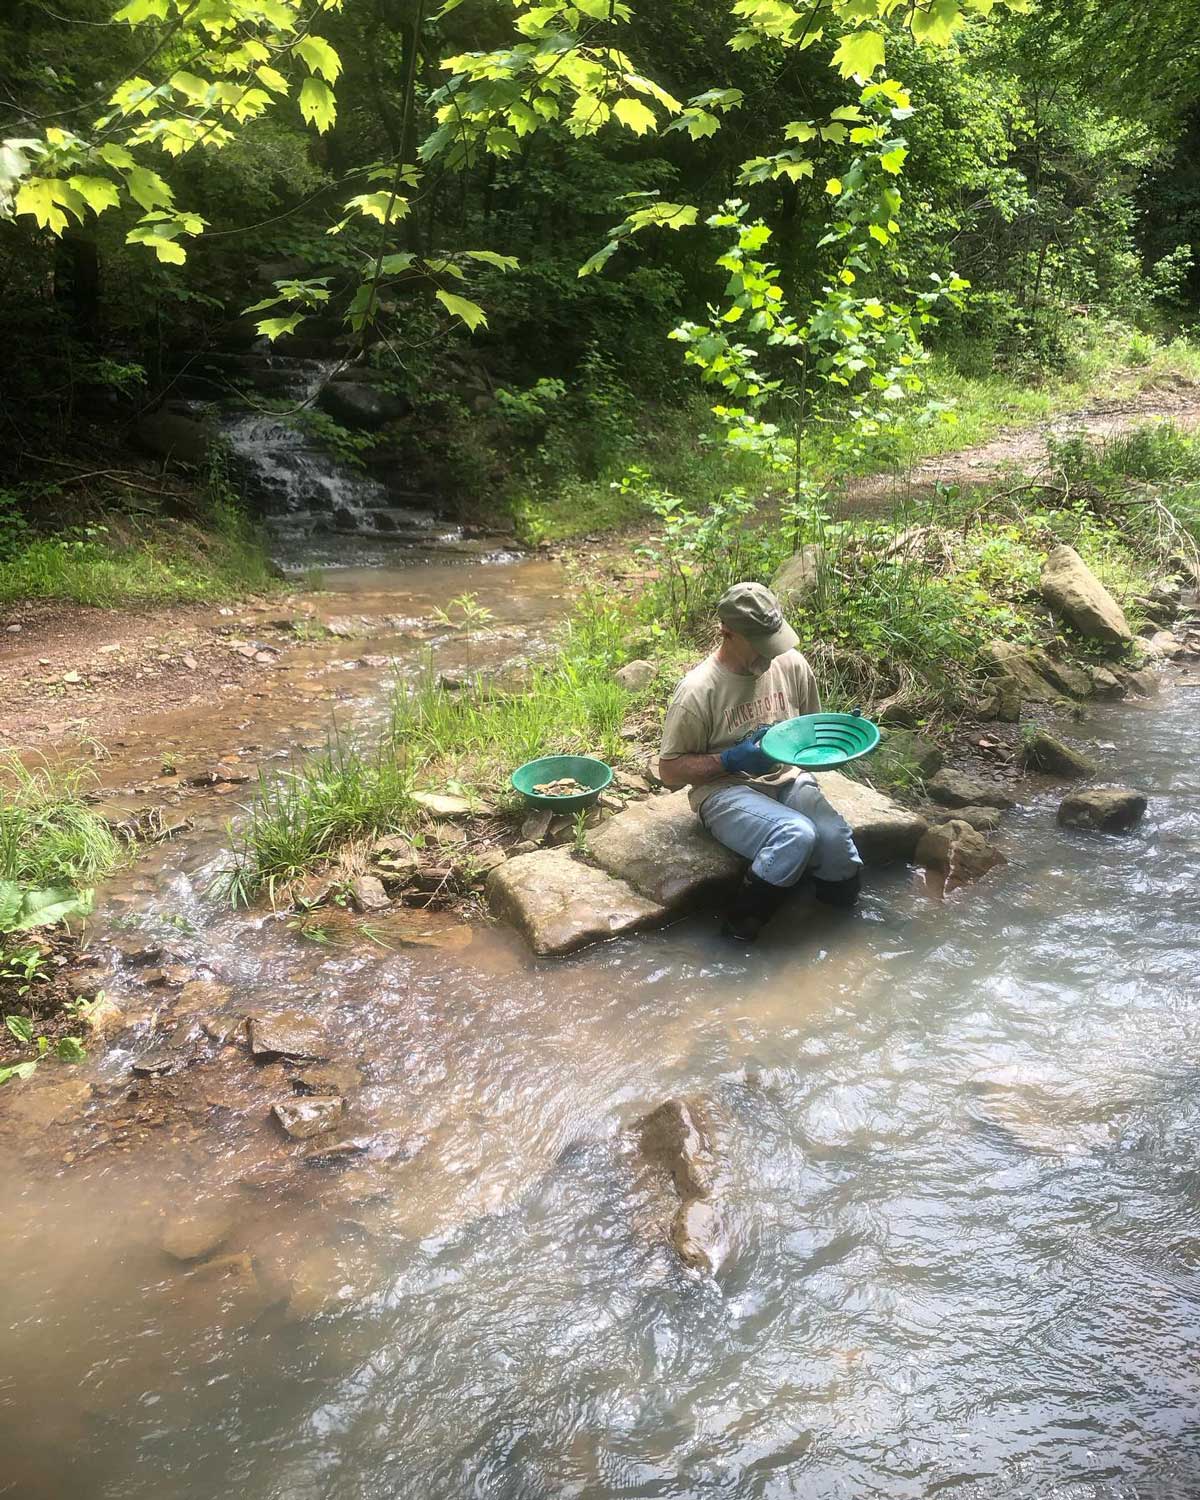 Panning for gold with Colorado soil in an Ozark nature artist's creek.